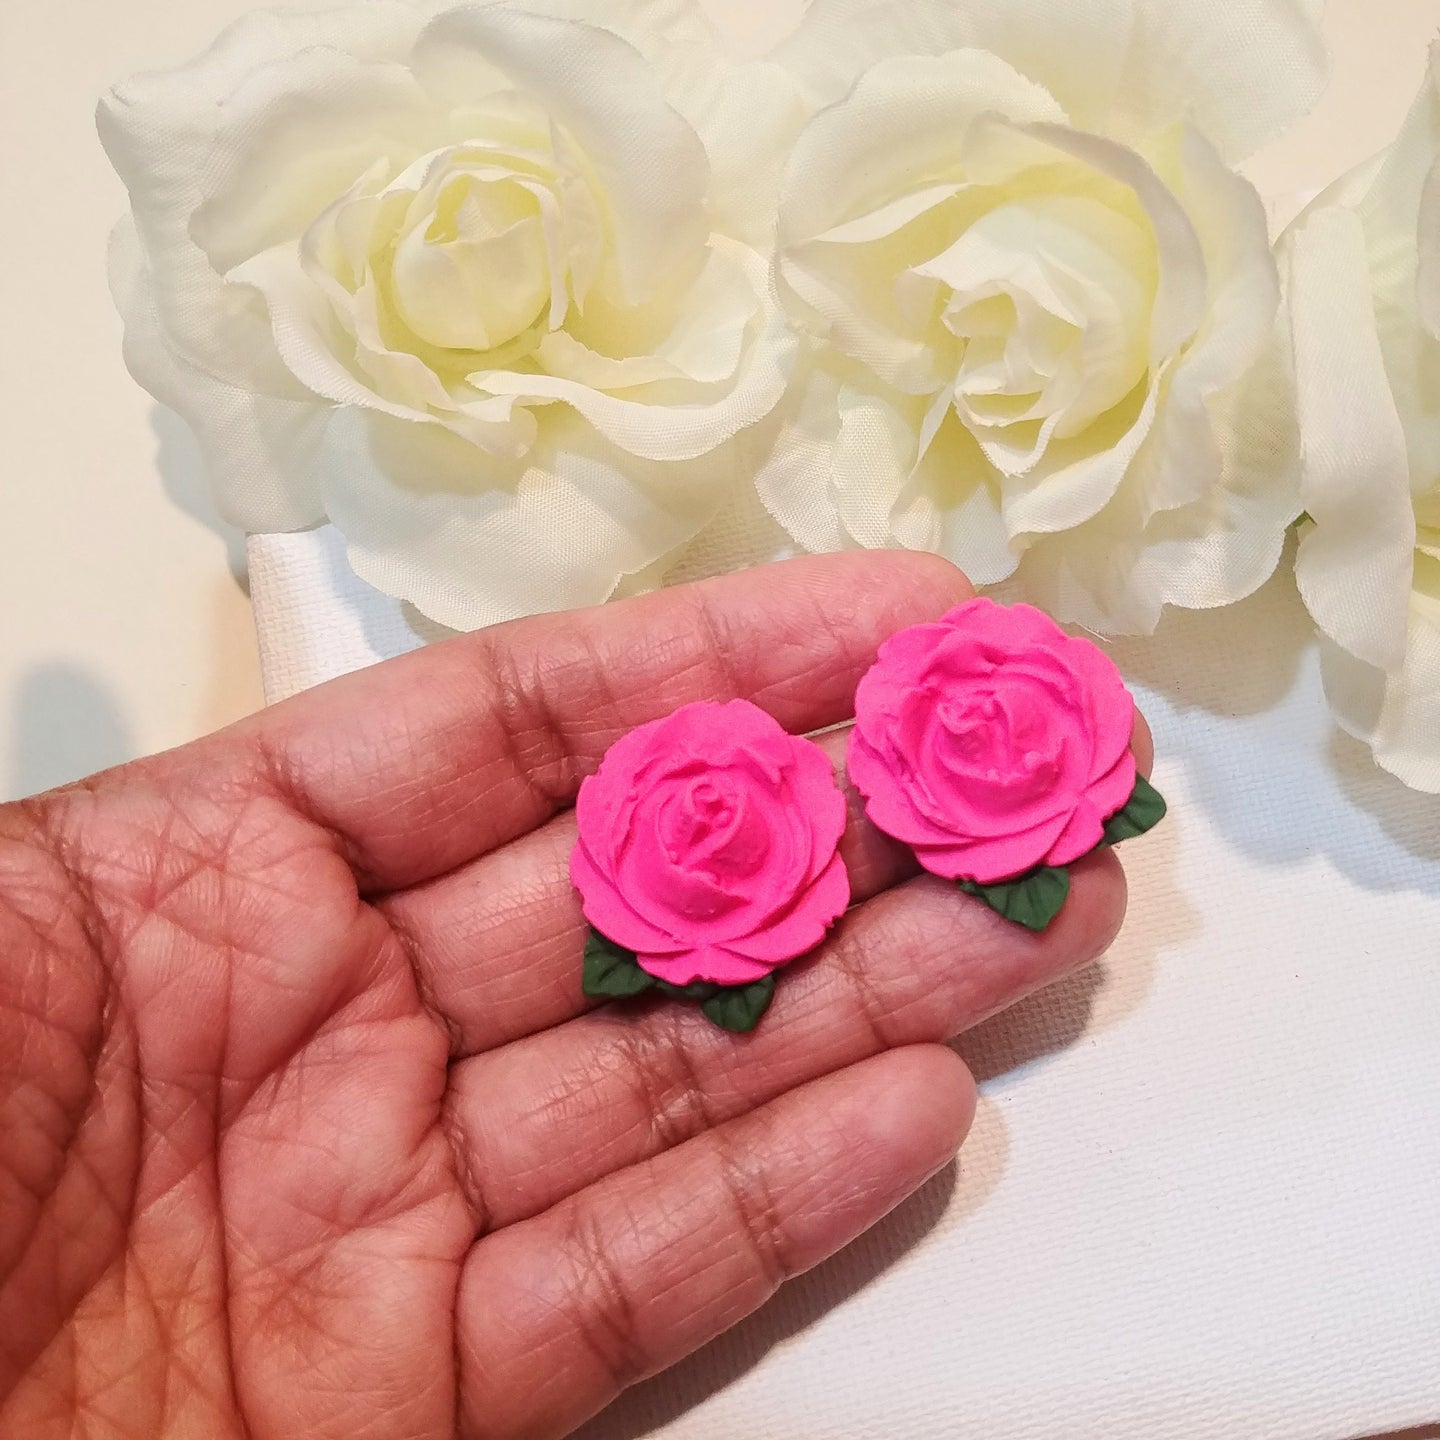 Large Pink Rose Stud Earrings, Cute Valentine's Day Gift Flower Shop Owner Gift